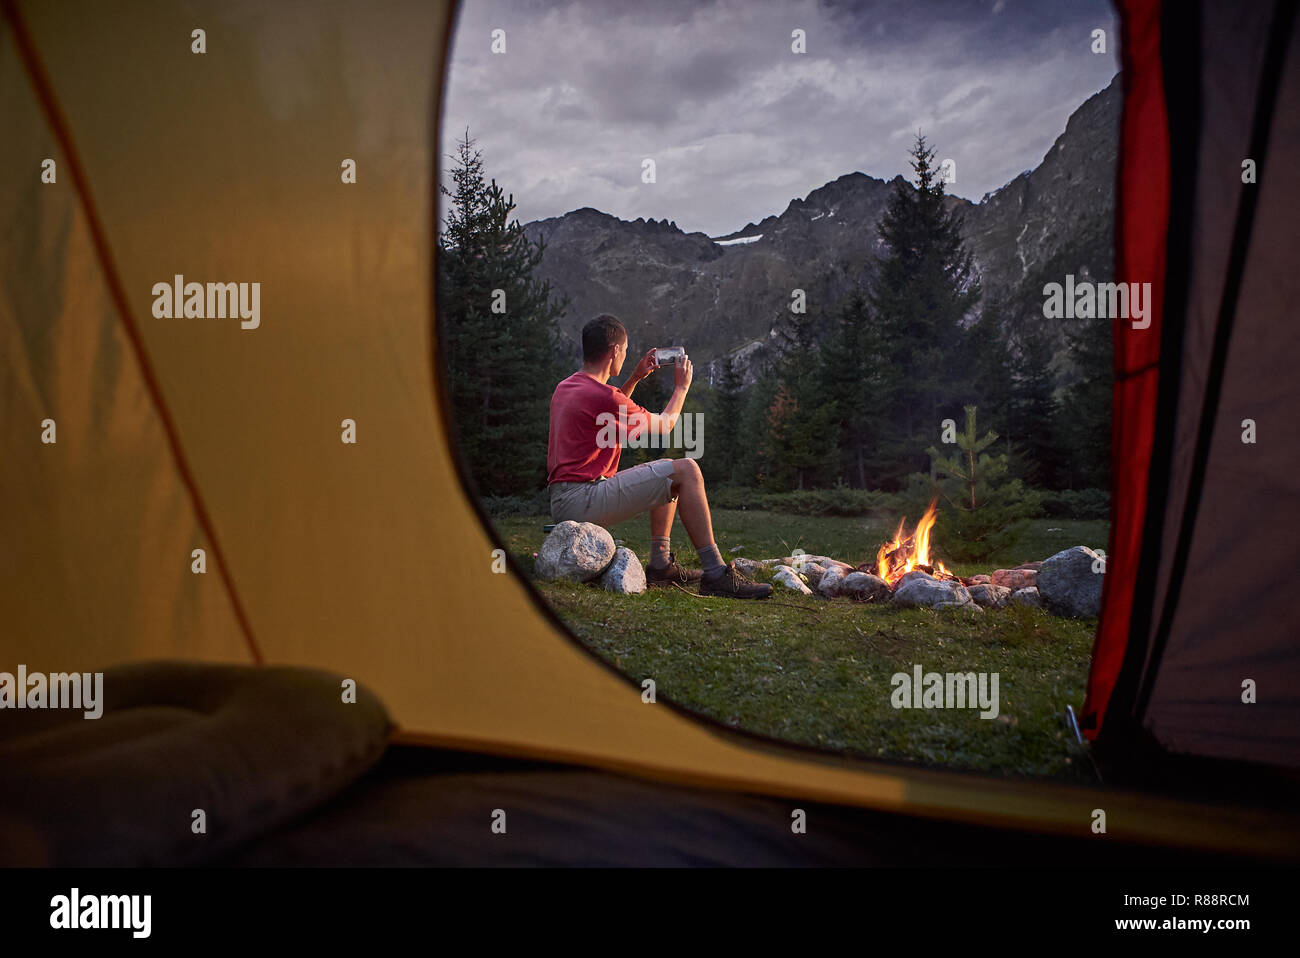 View from inside tent at sunset. Man hiker sitting at bonfire with cellphone Stock Photo